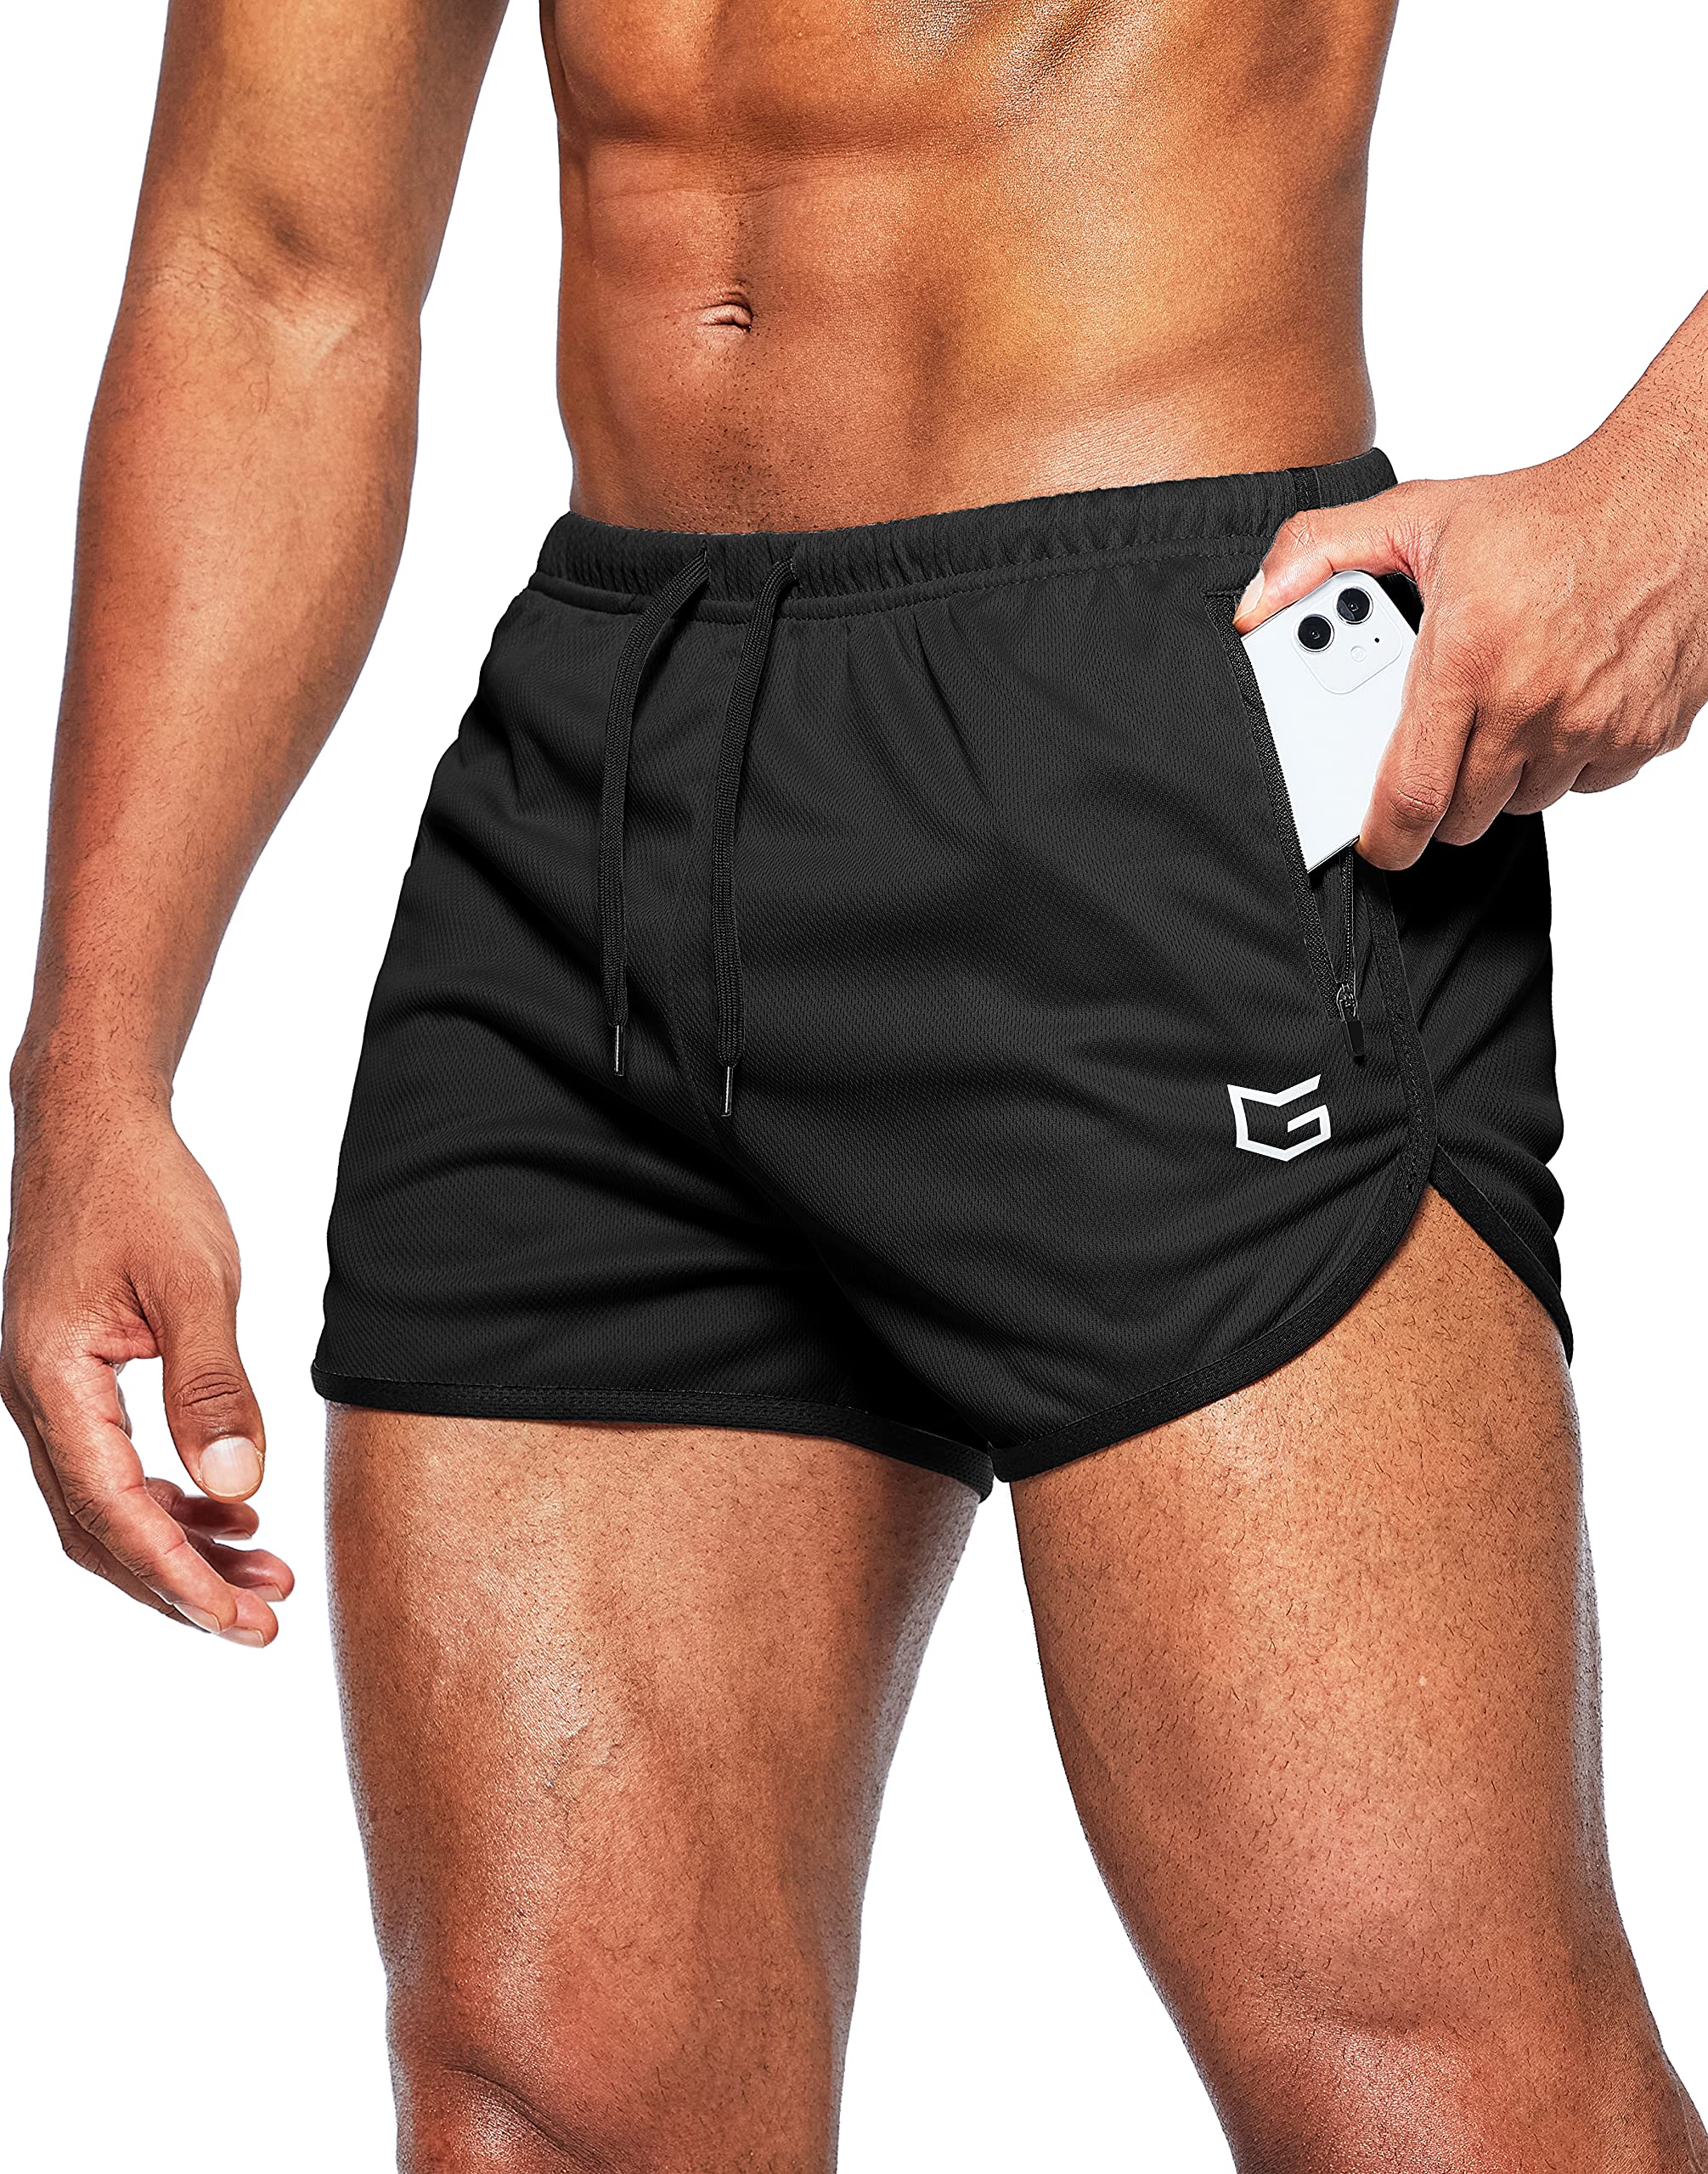 g gradual Mens 7 Workout Running Shorts Quick Dry Lightweight gym Shorts  with Zip Pockets (gray Small) 